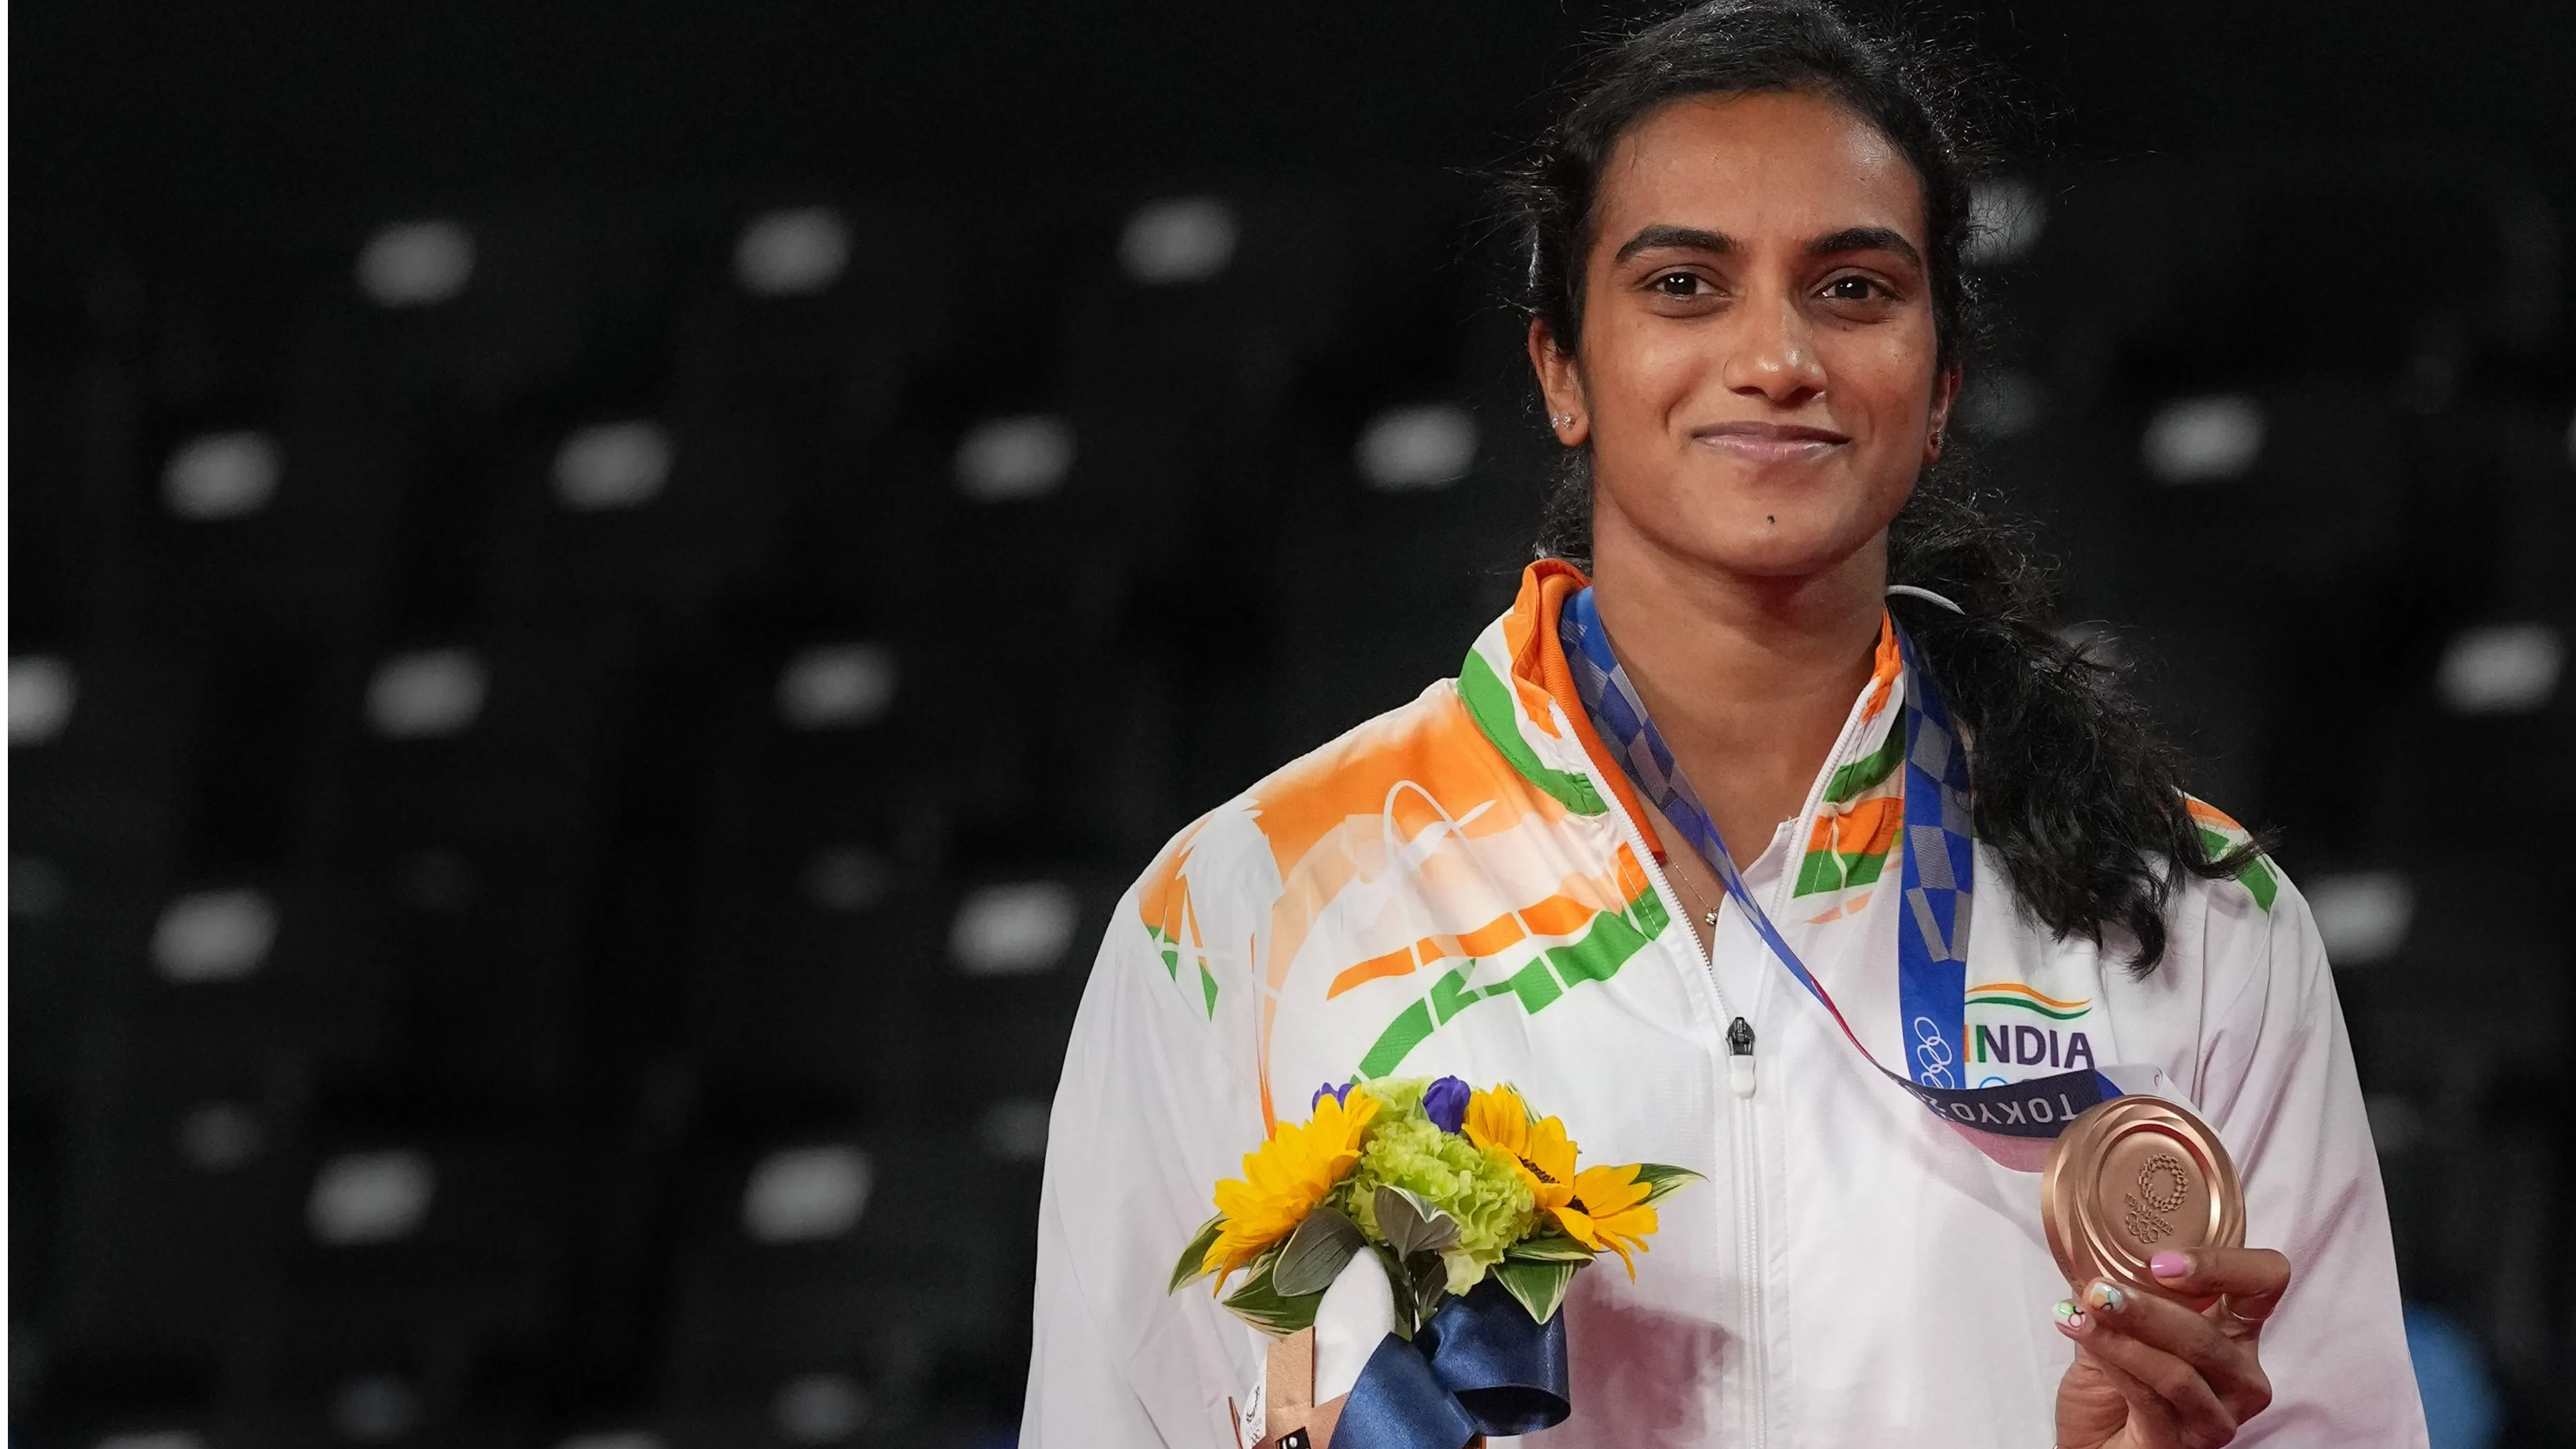 Huge thing: PV Sindhu on winning back-to-back Olympic medals